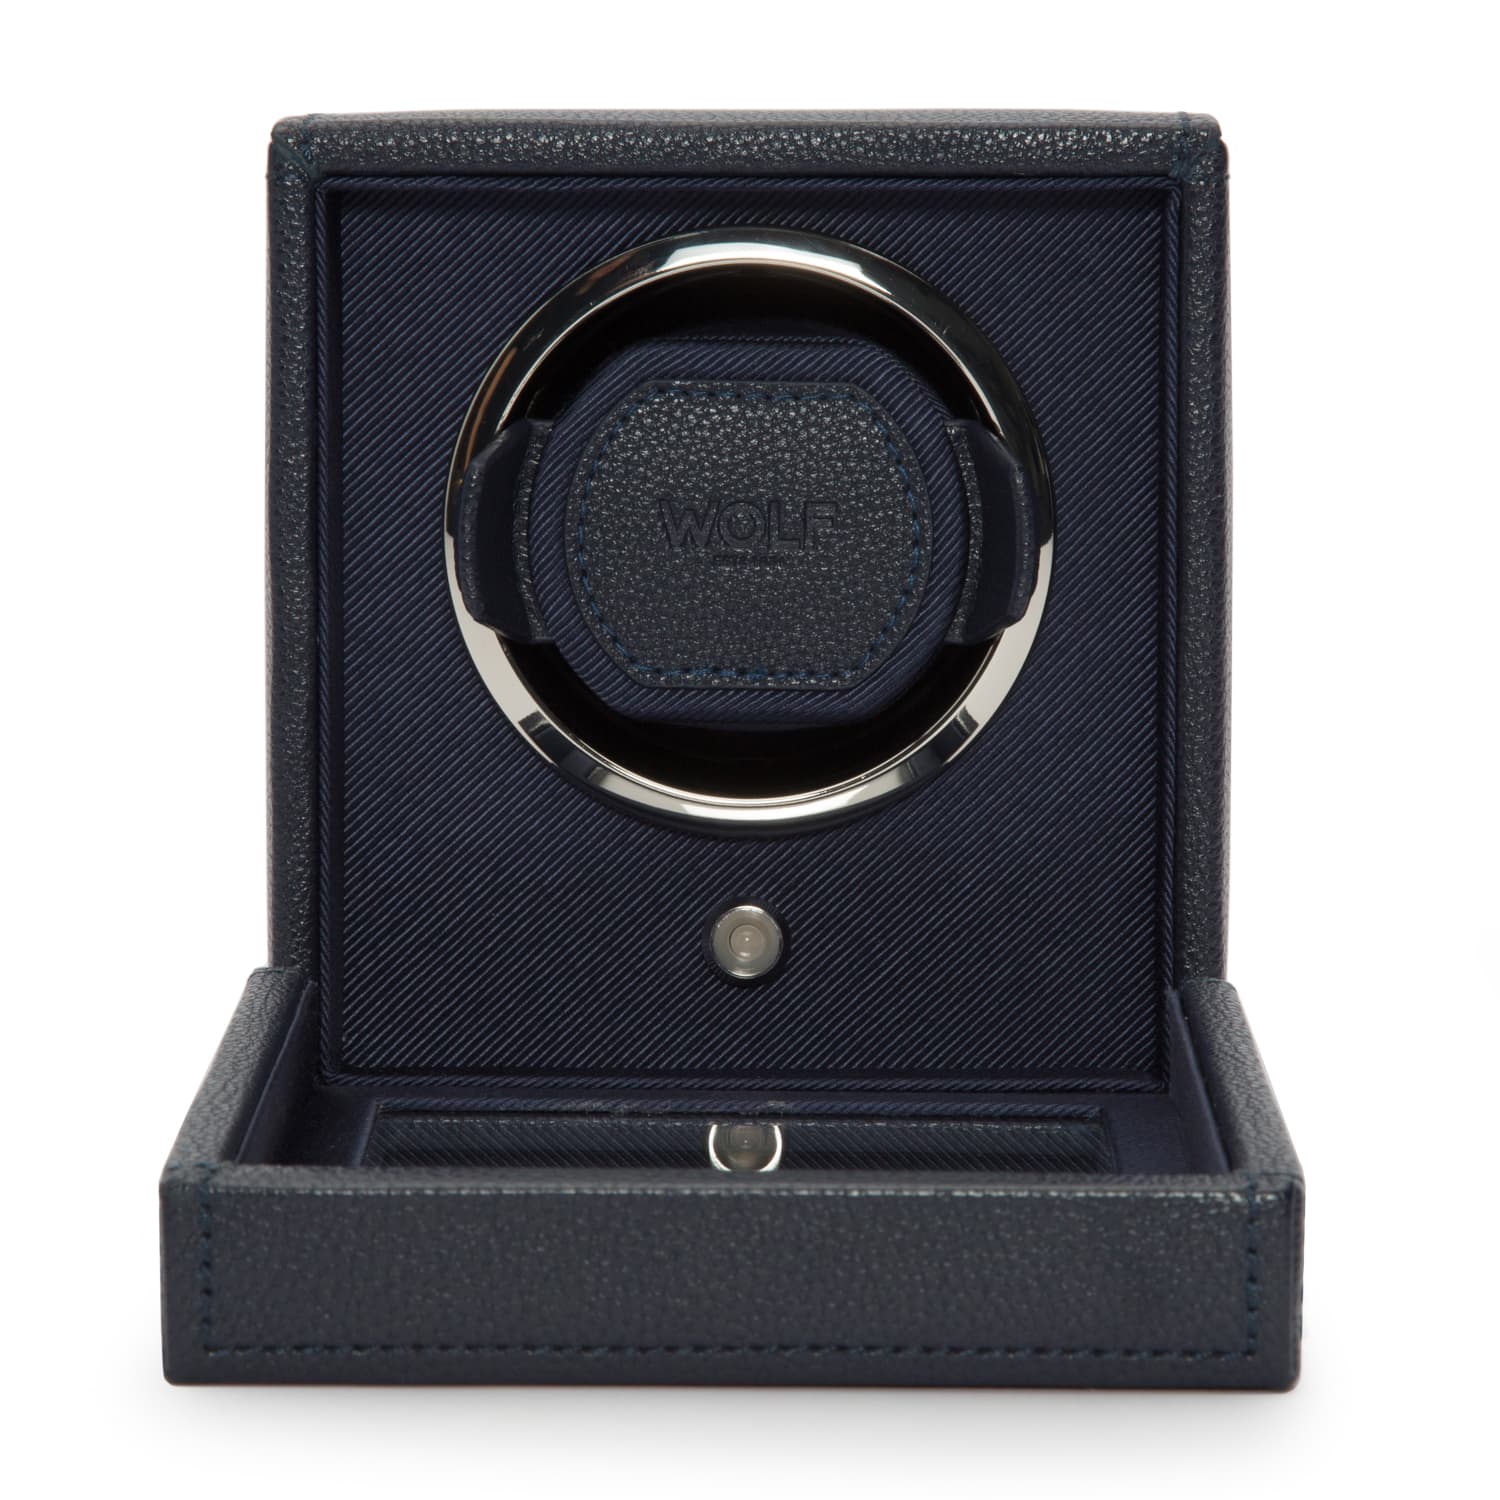 Wolf-Cub-Single-Watch-Winder-with-Cover-Navy-461117-2